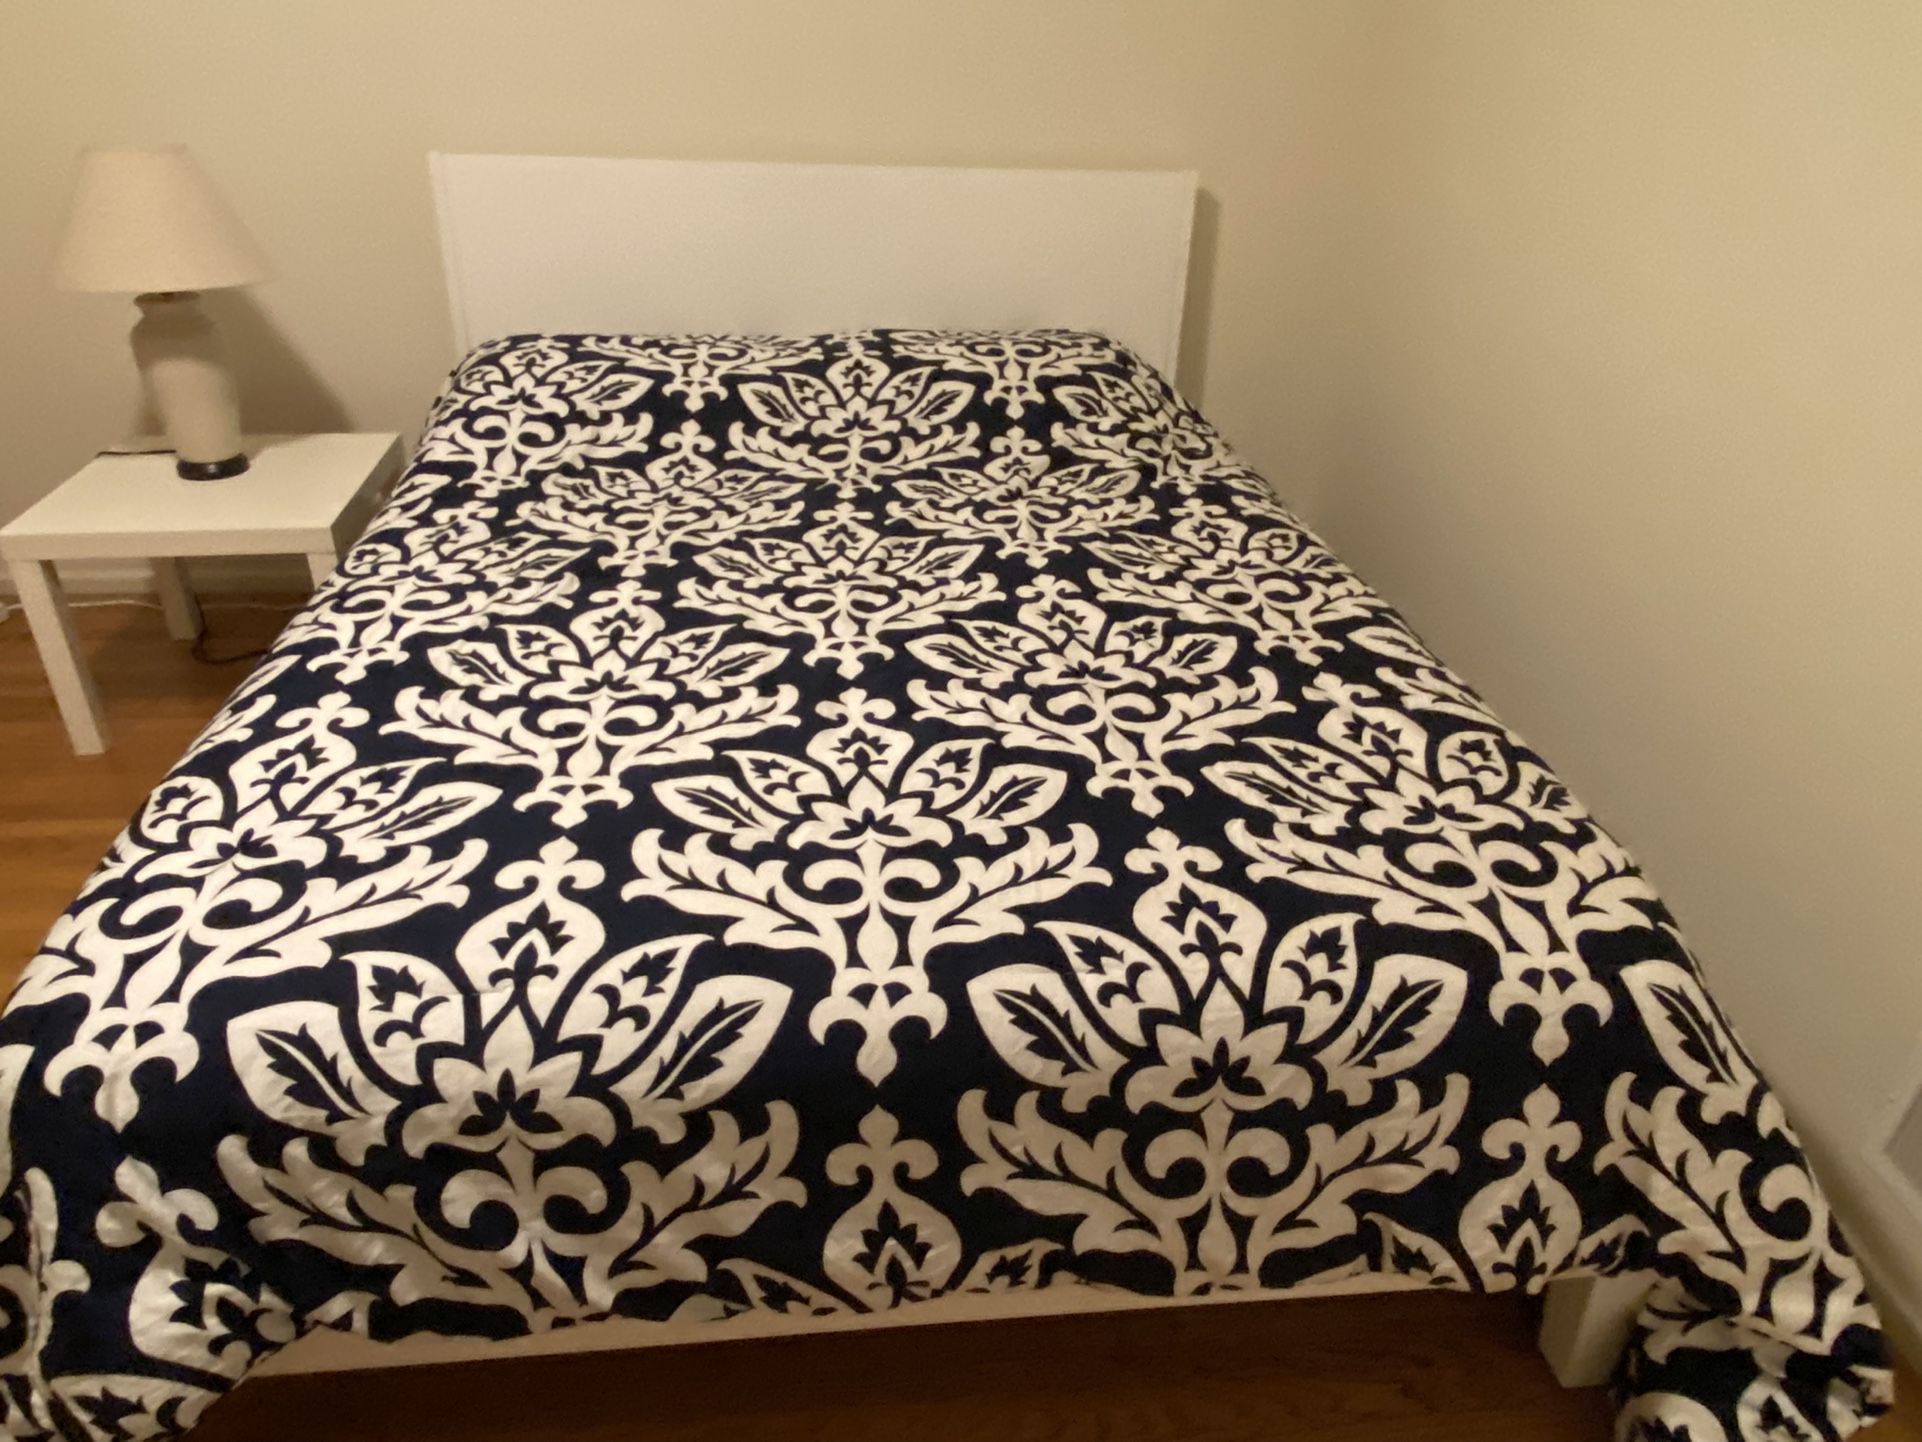 Ikea Queen Bed Frame With Sealy Mattress